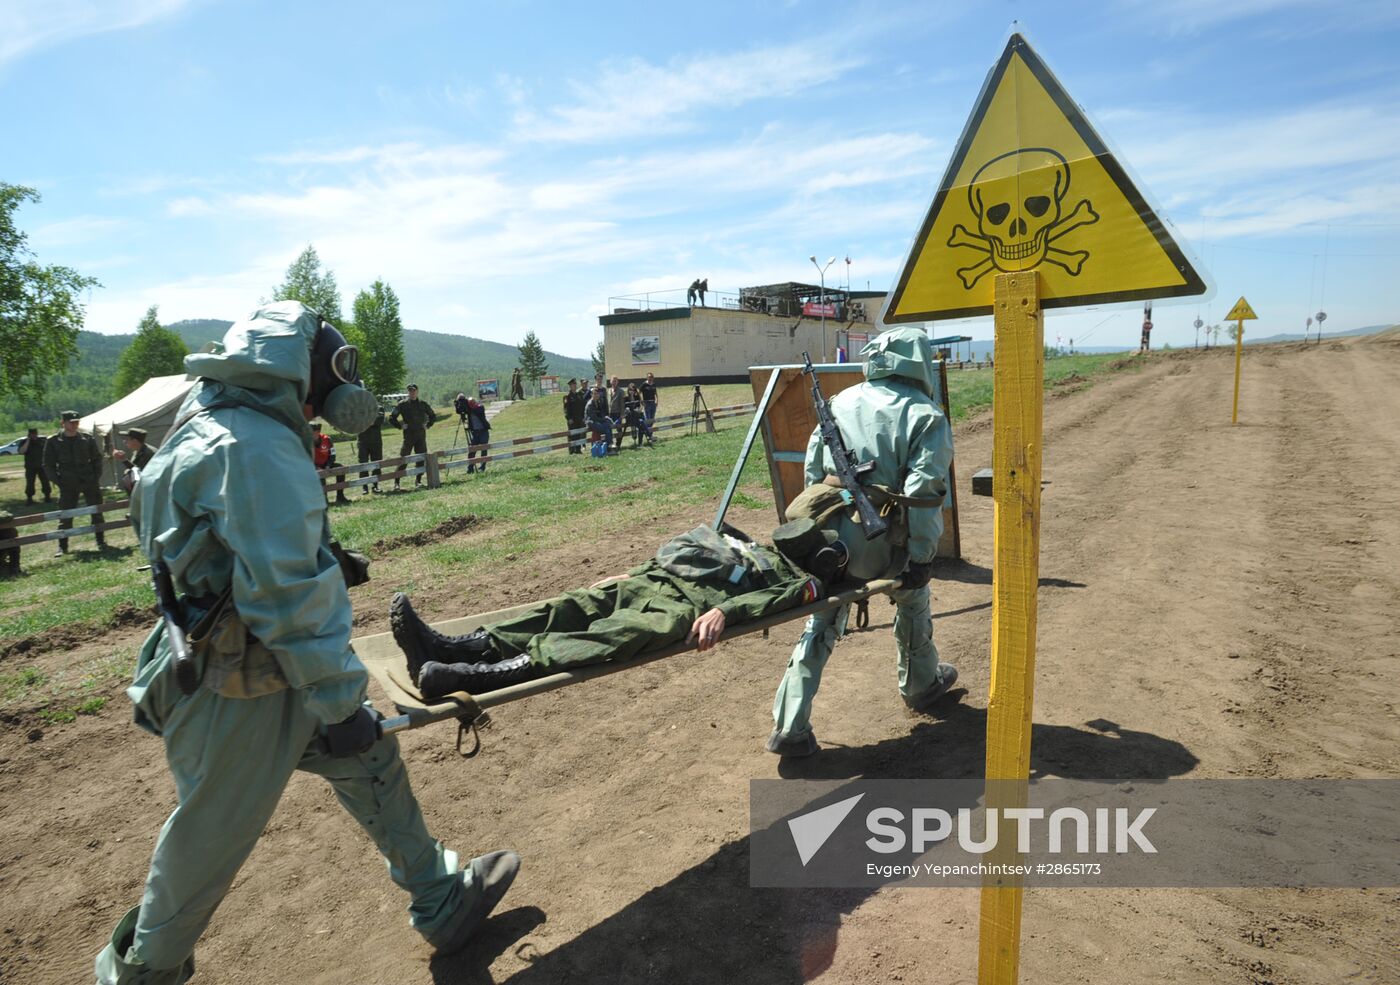 Safe Environment 2016 army contest in Transbaikal Territory